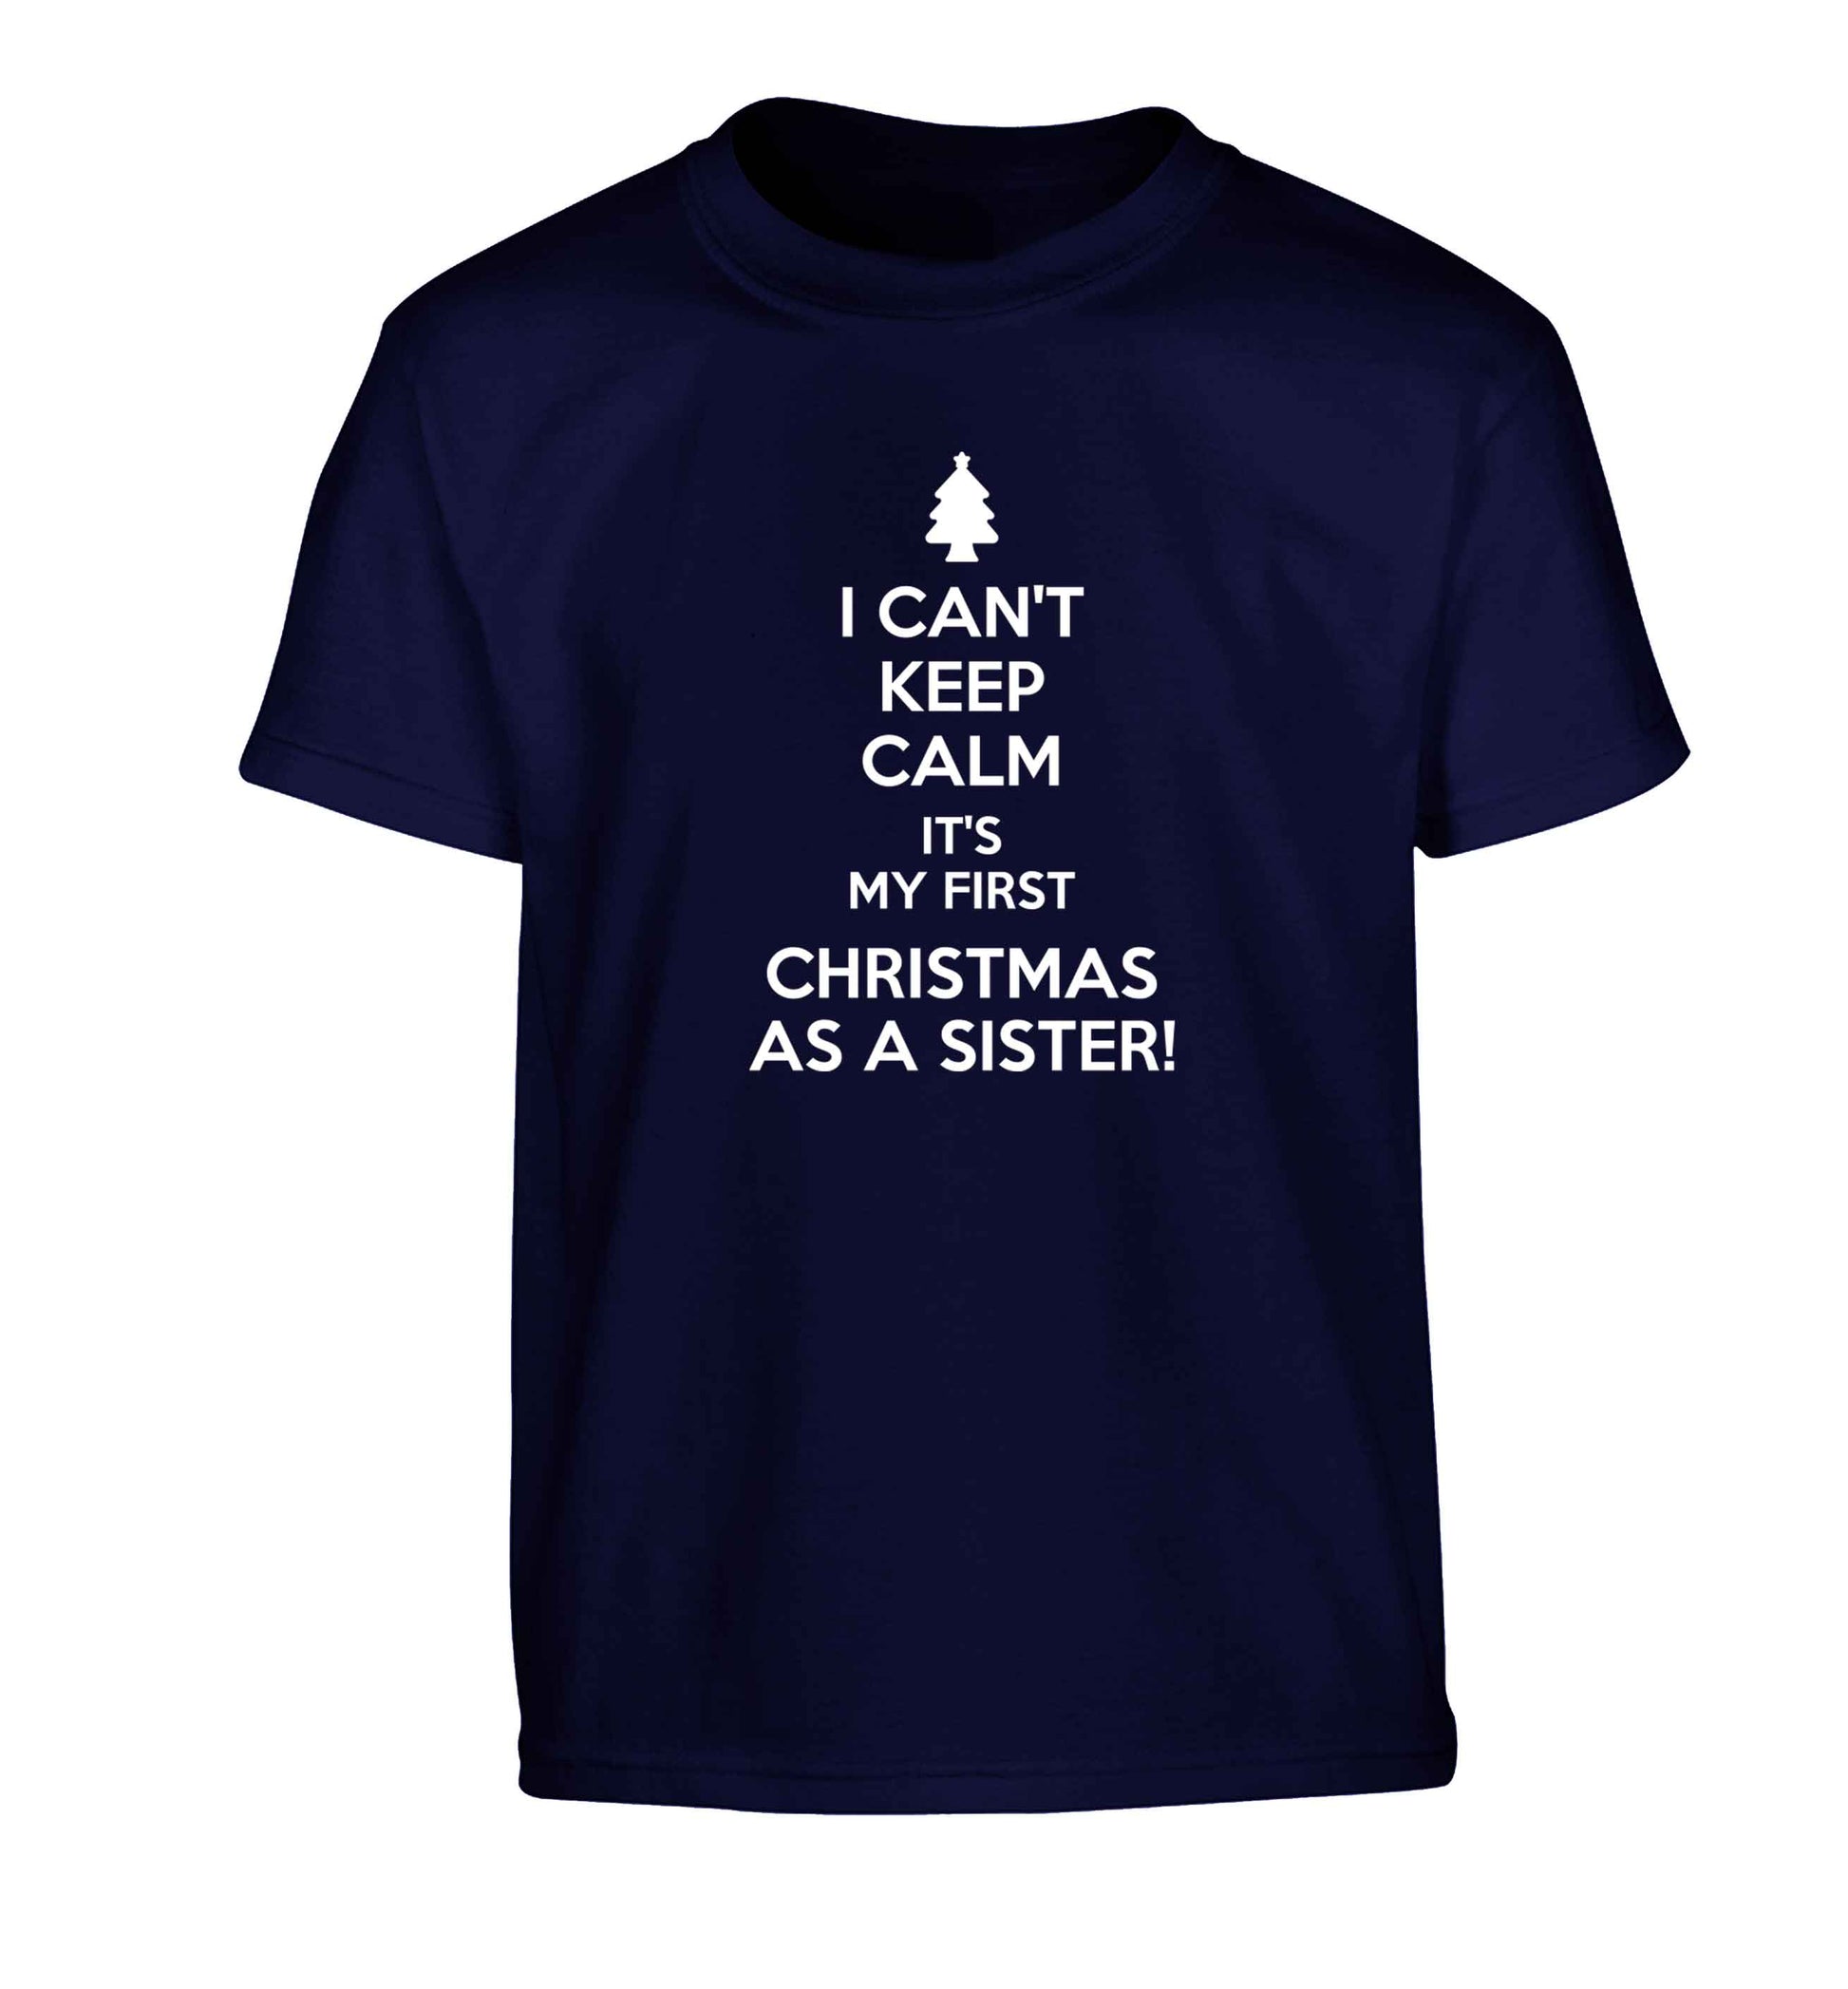 I can't keep calm it's my first Christmas as a sister! Children's navy Tshirt 12-13 Years